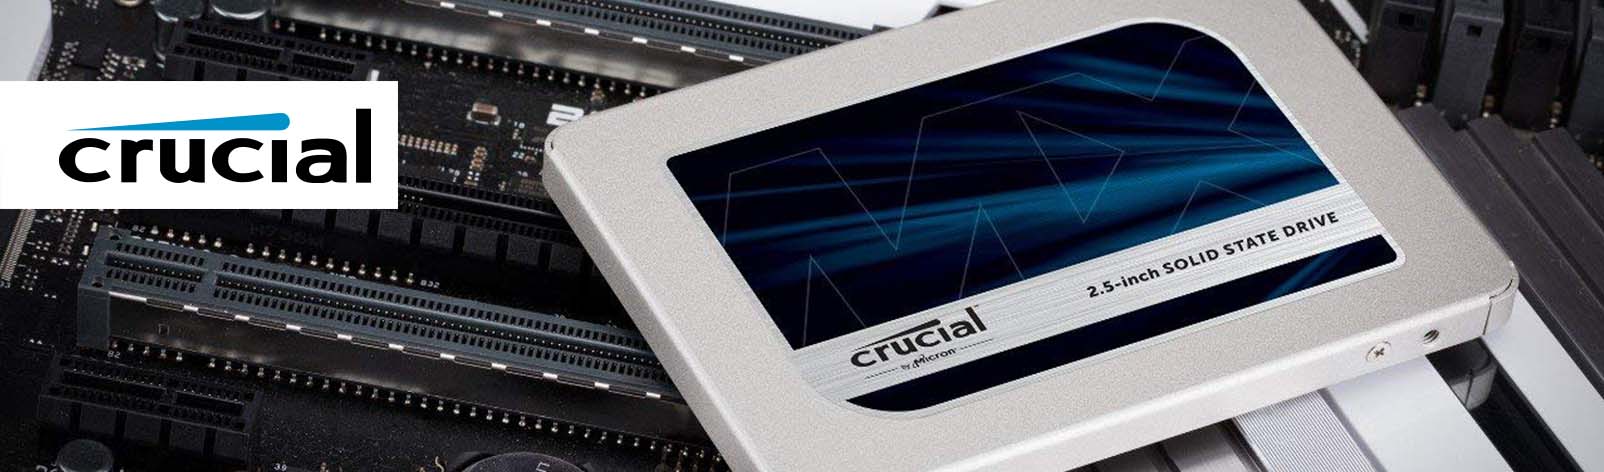 Crucial MX500 1TB 3D NAND SATA 2.5 Inch Internal Solid State  CT1000MX500SSD1